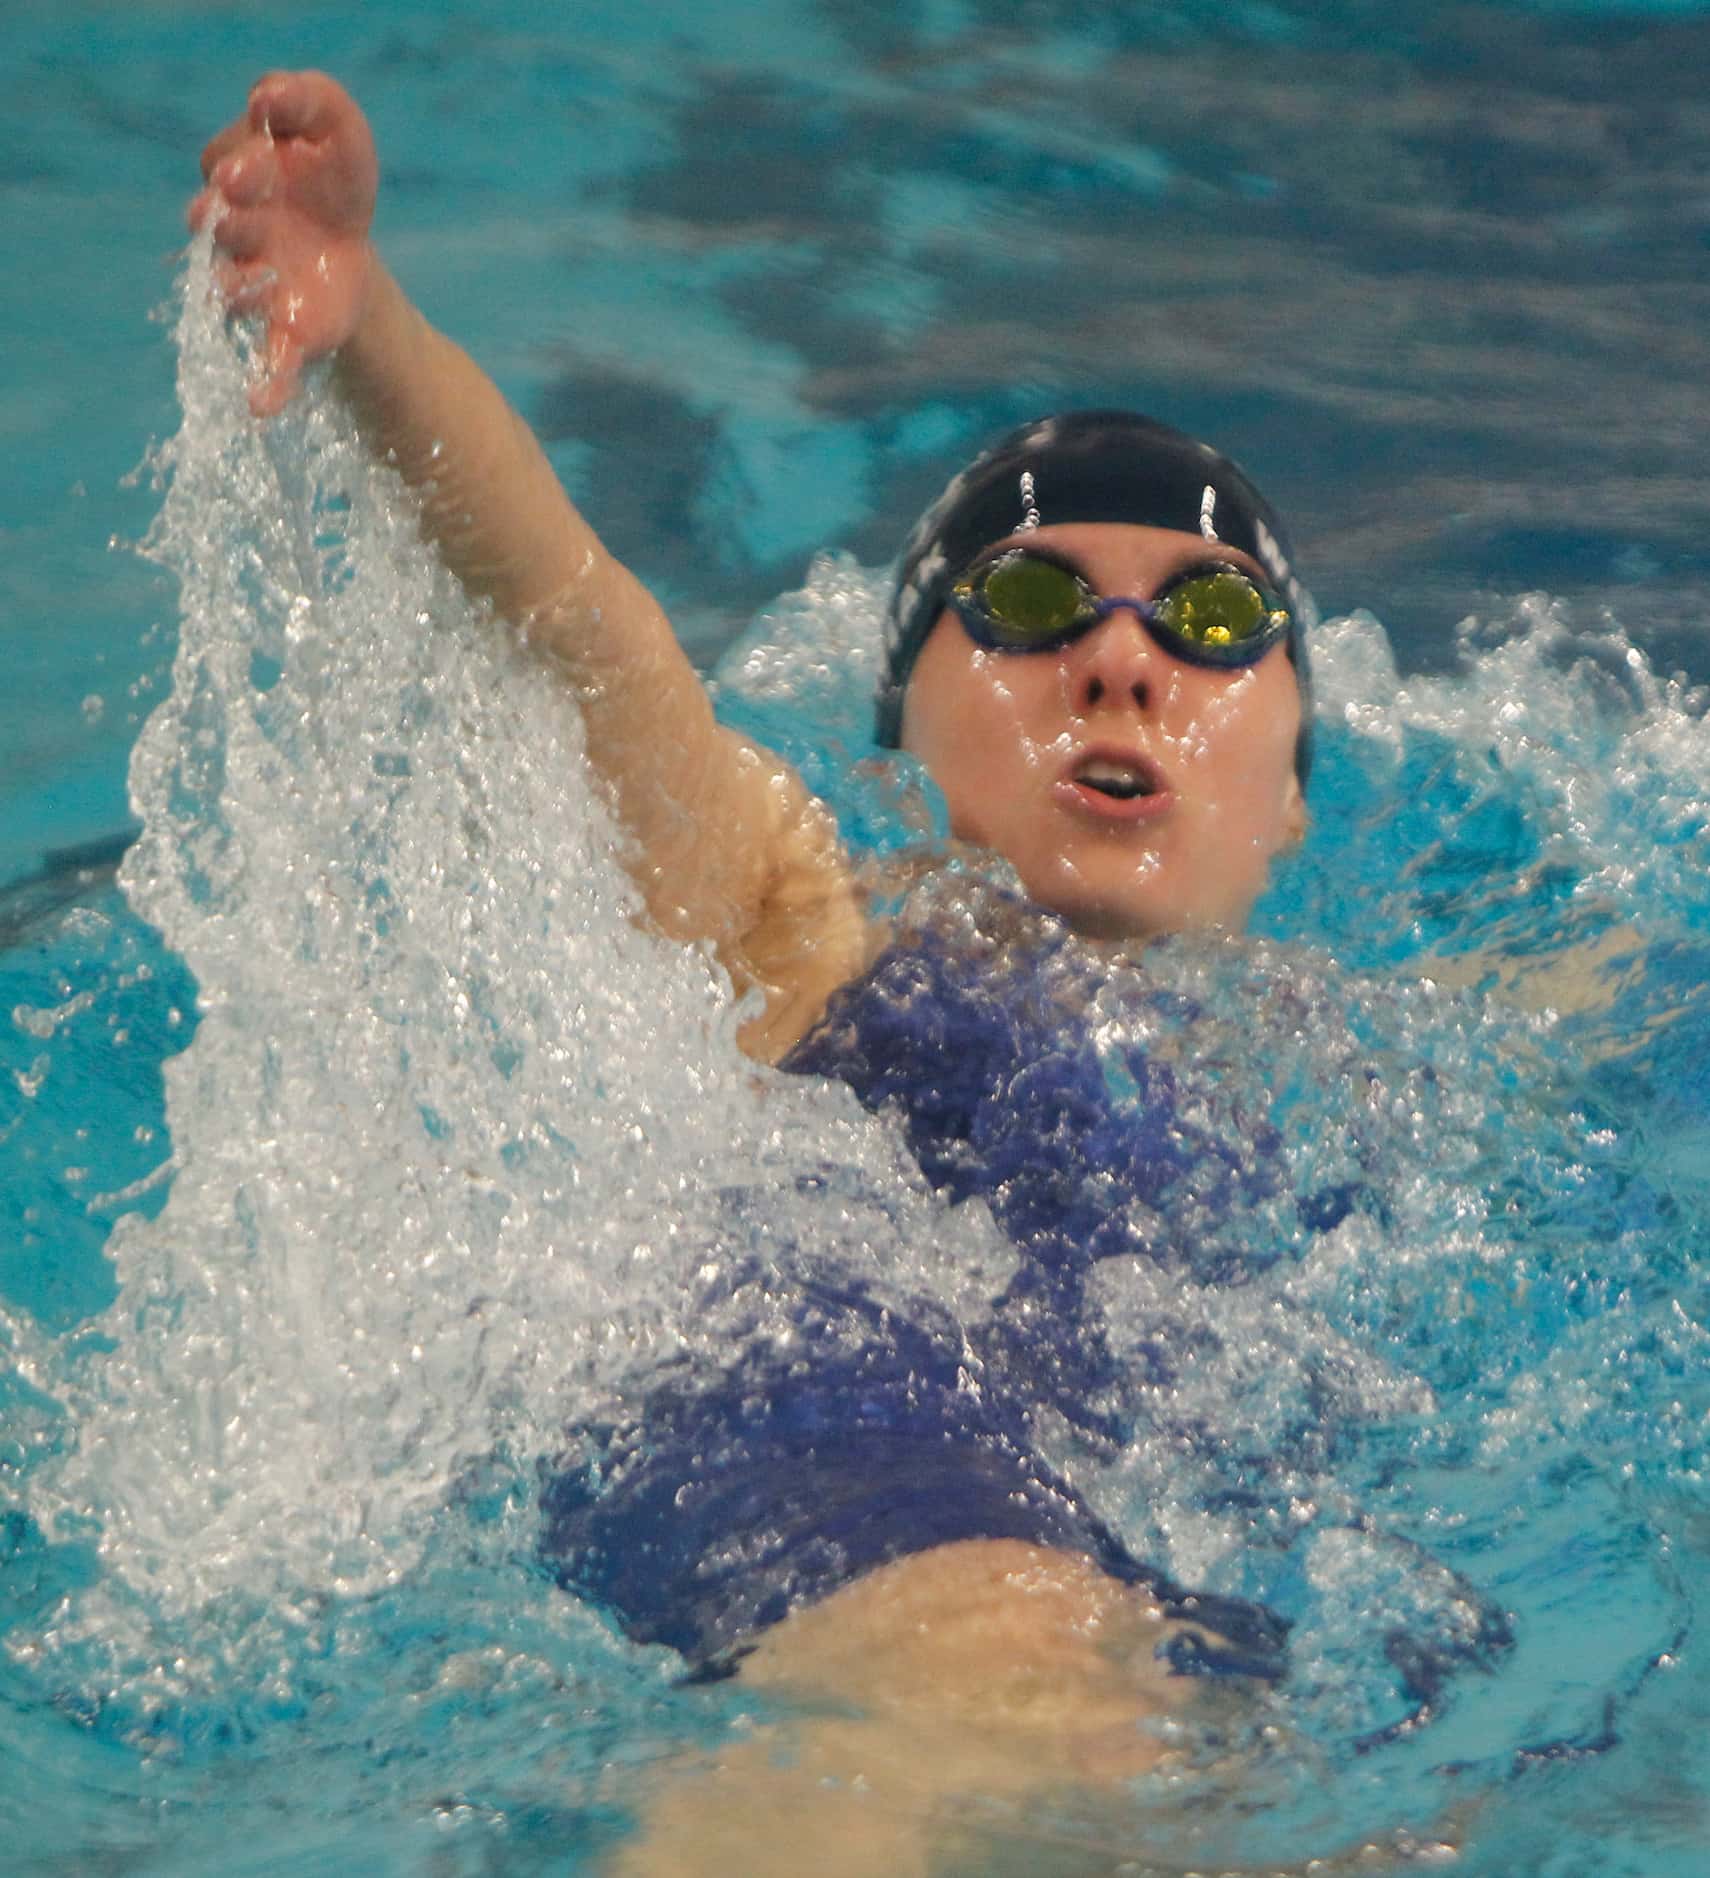 Flower Mound Marcus swimmer Julia Wozniak finished first in the 6A Girls 200 Yard IM event...